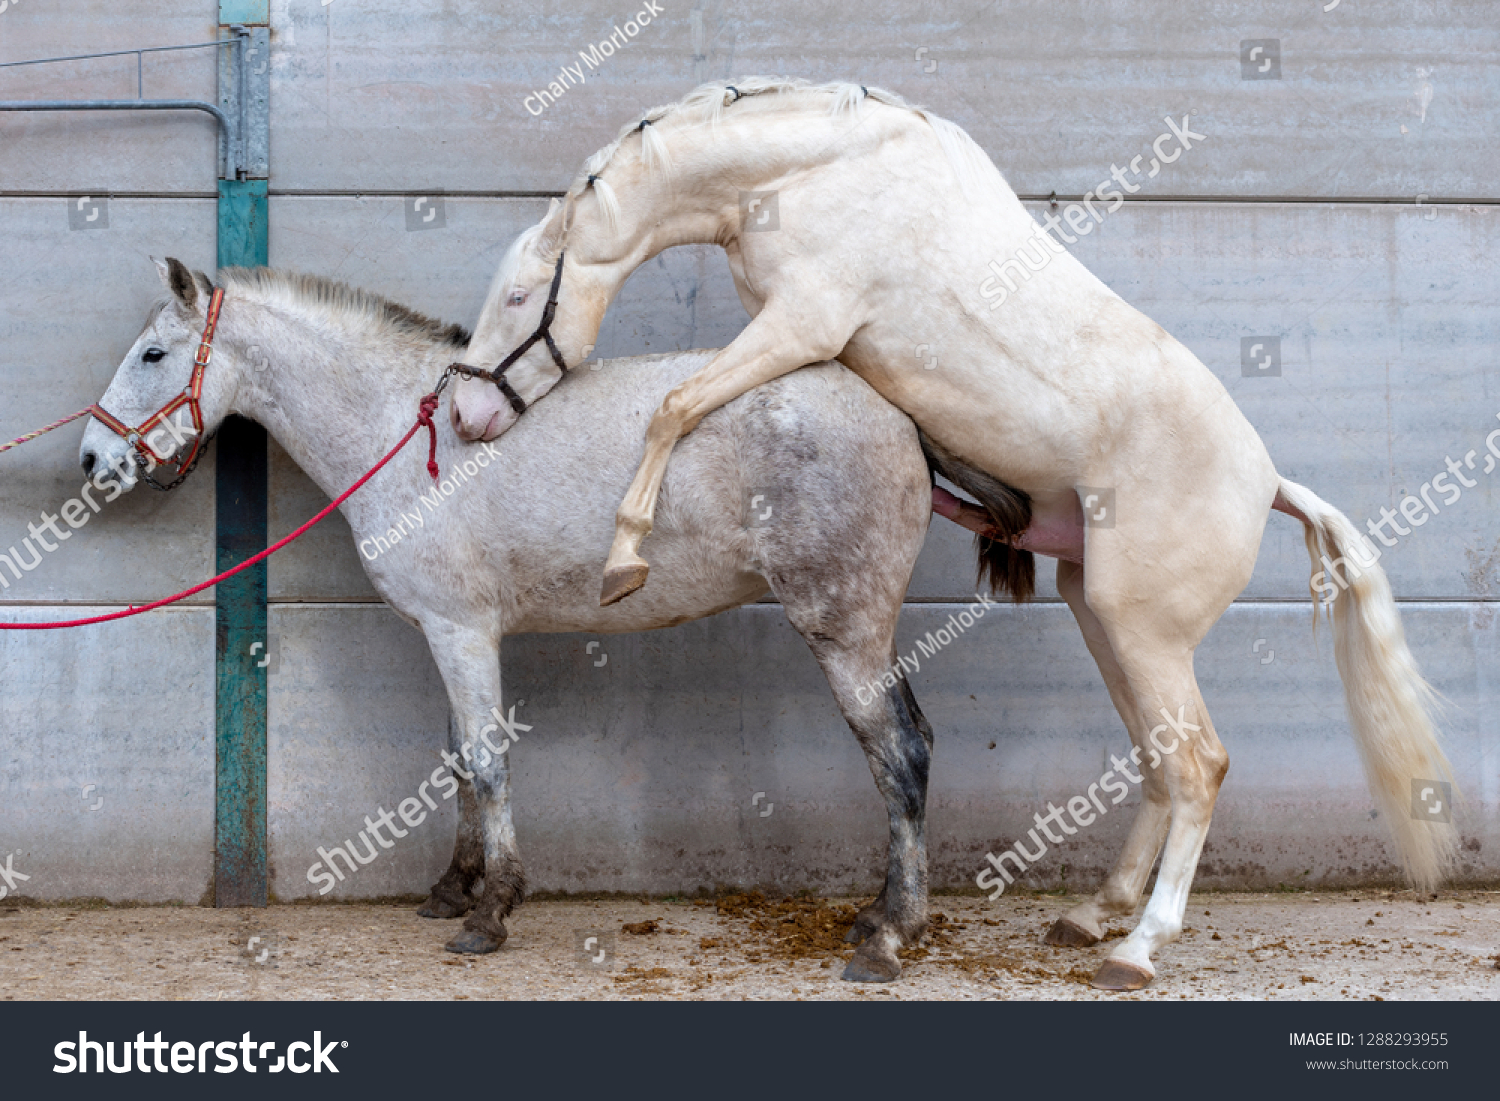 2 Male Horses Mating